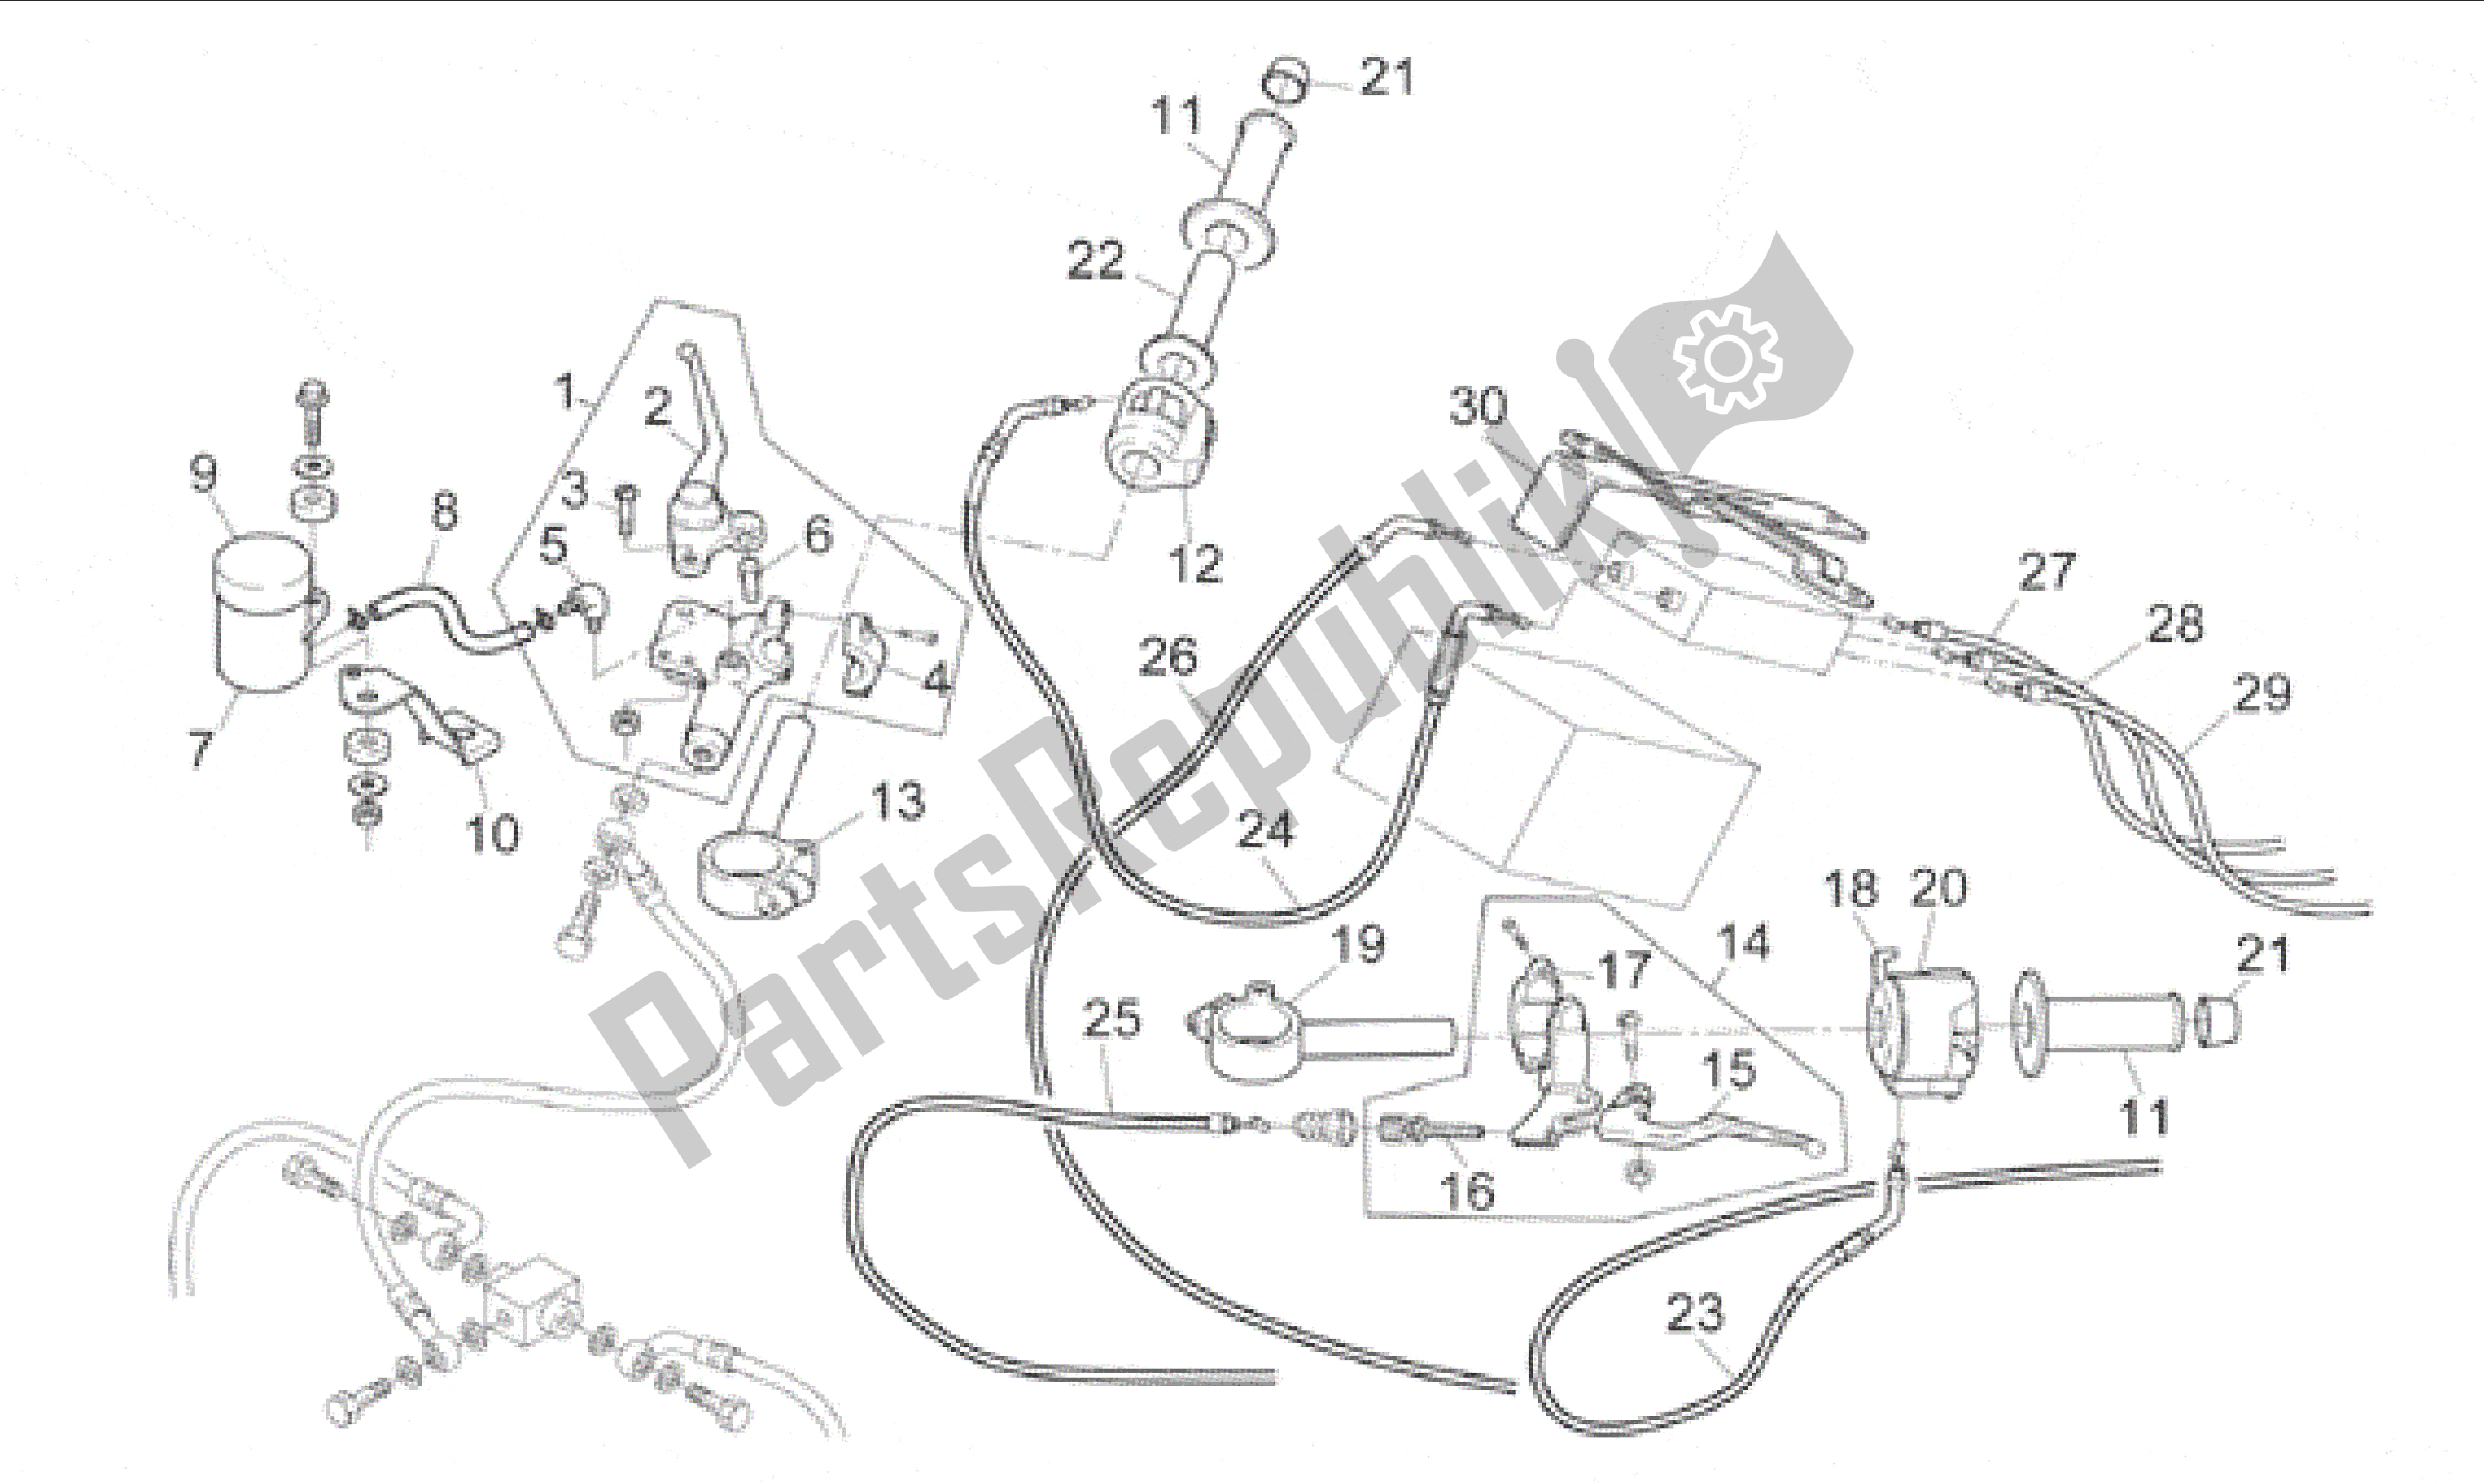 All parts for the Controls of the Aprilia RS 250 1995 - 1997